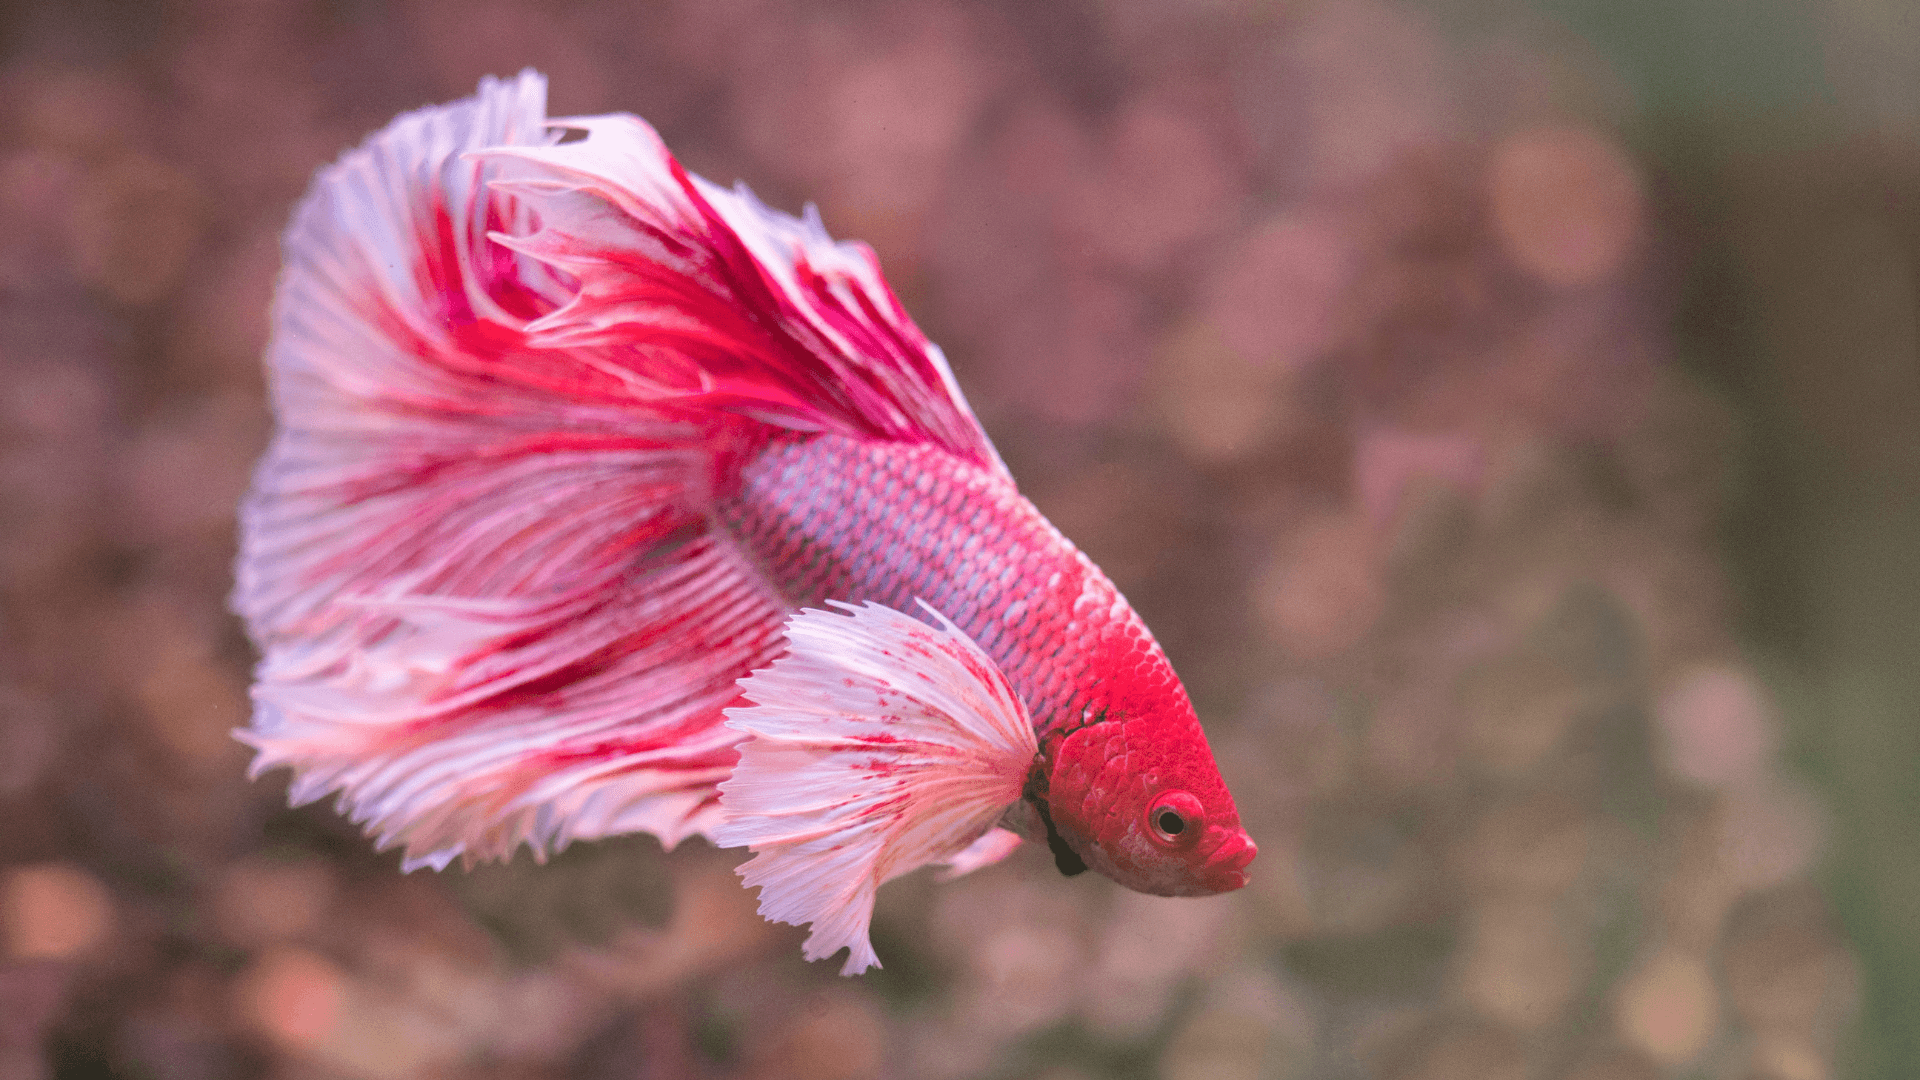 A photo of Siamese fighting fish